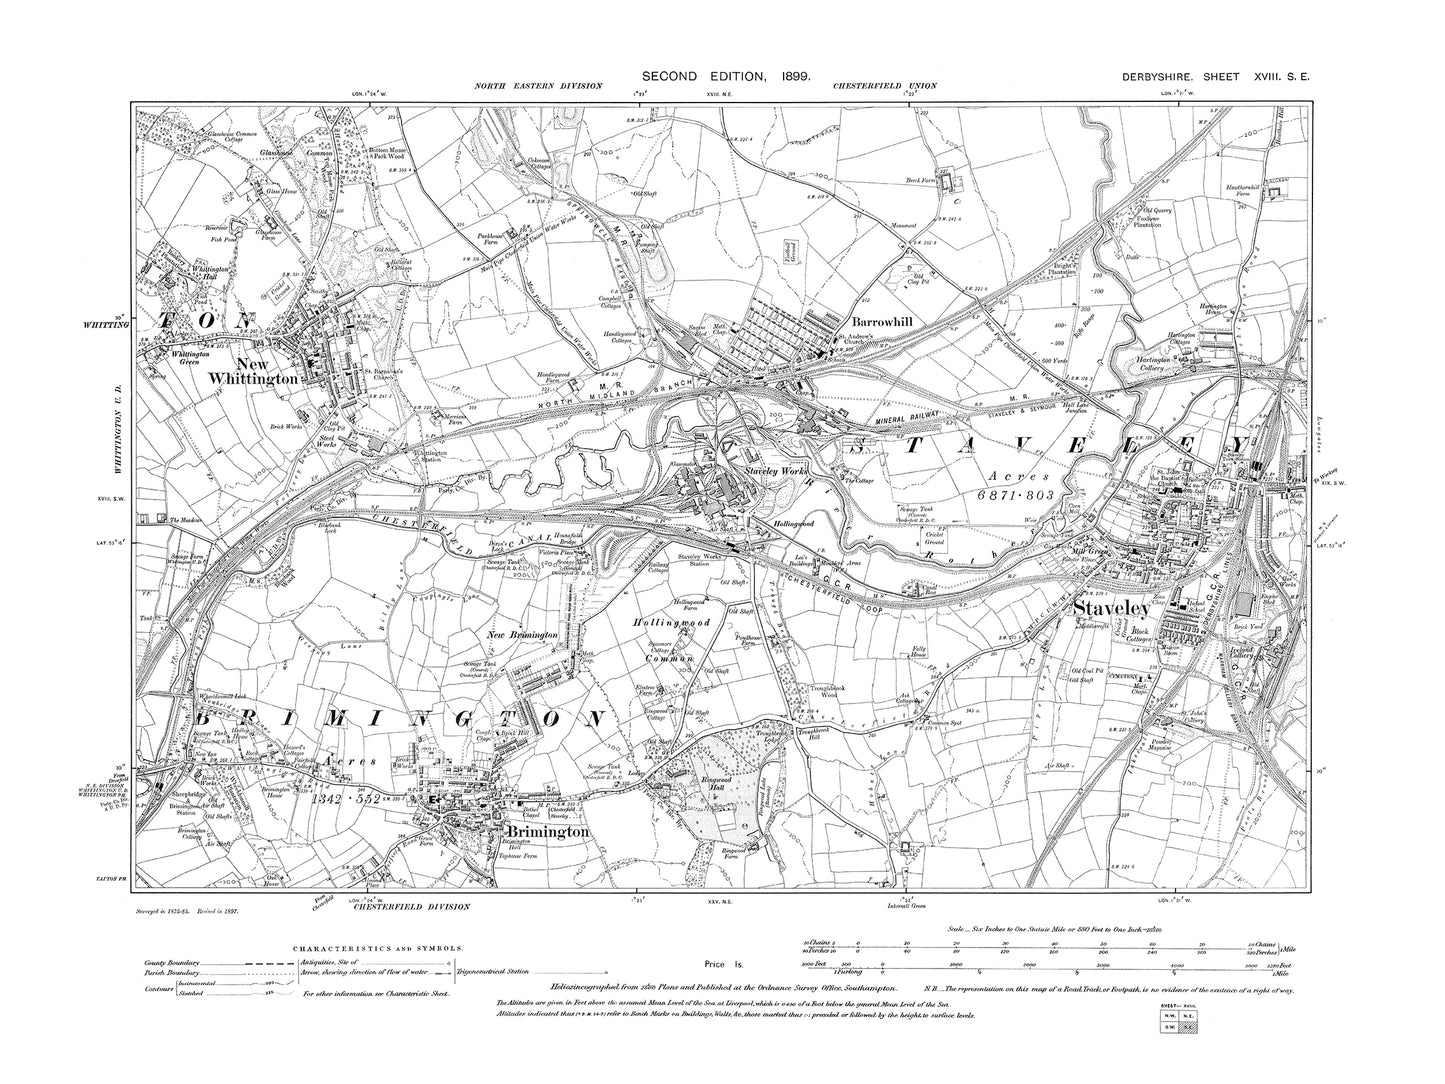 Old OS map dated 1899, showing Brimington, New Whittington, Staveley in Derbyshire 18SE